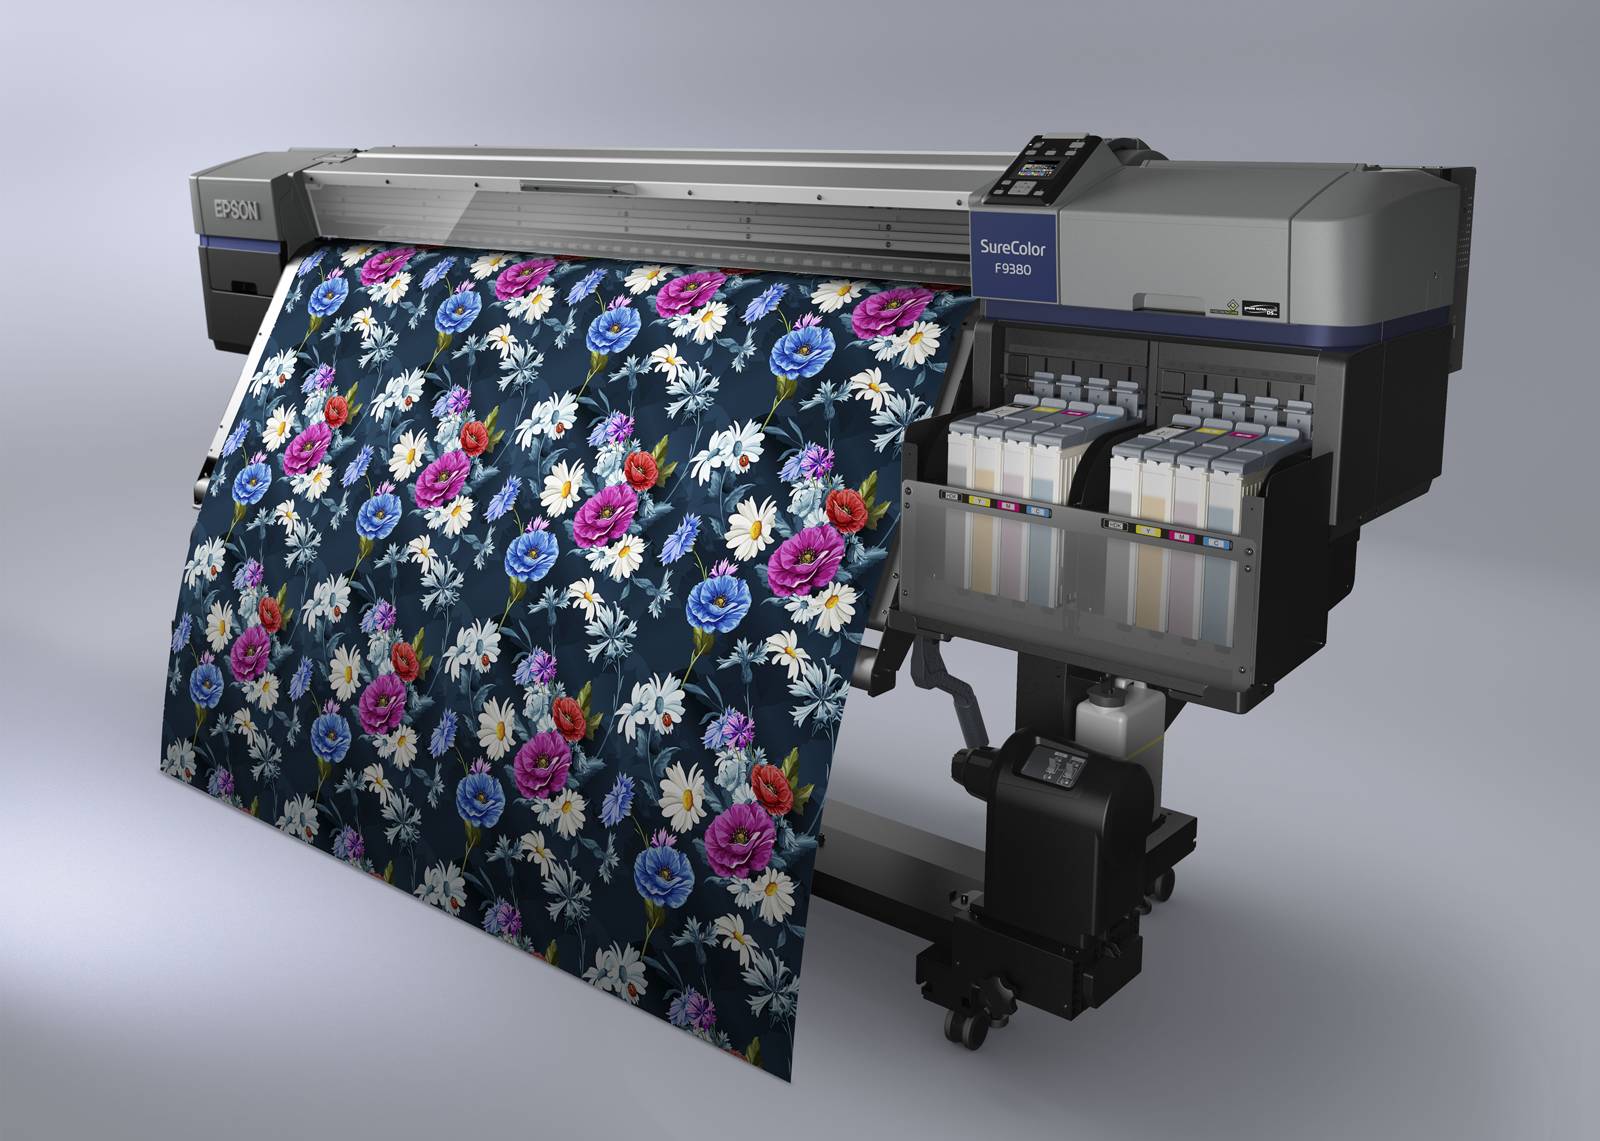 Precision fast, play color - Epson new SureColor F9380 beautiful debut